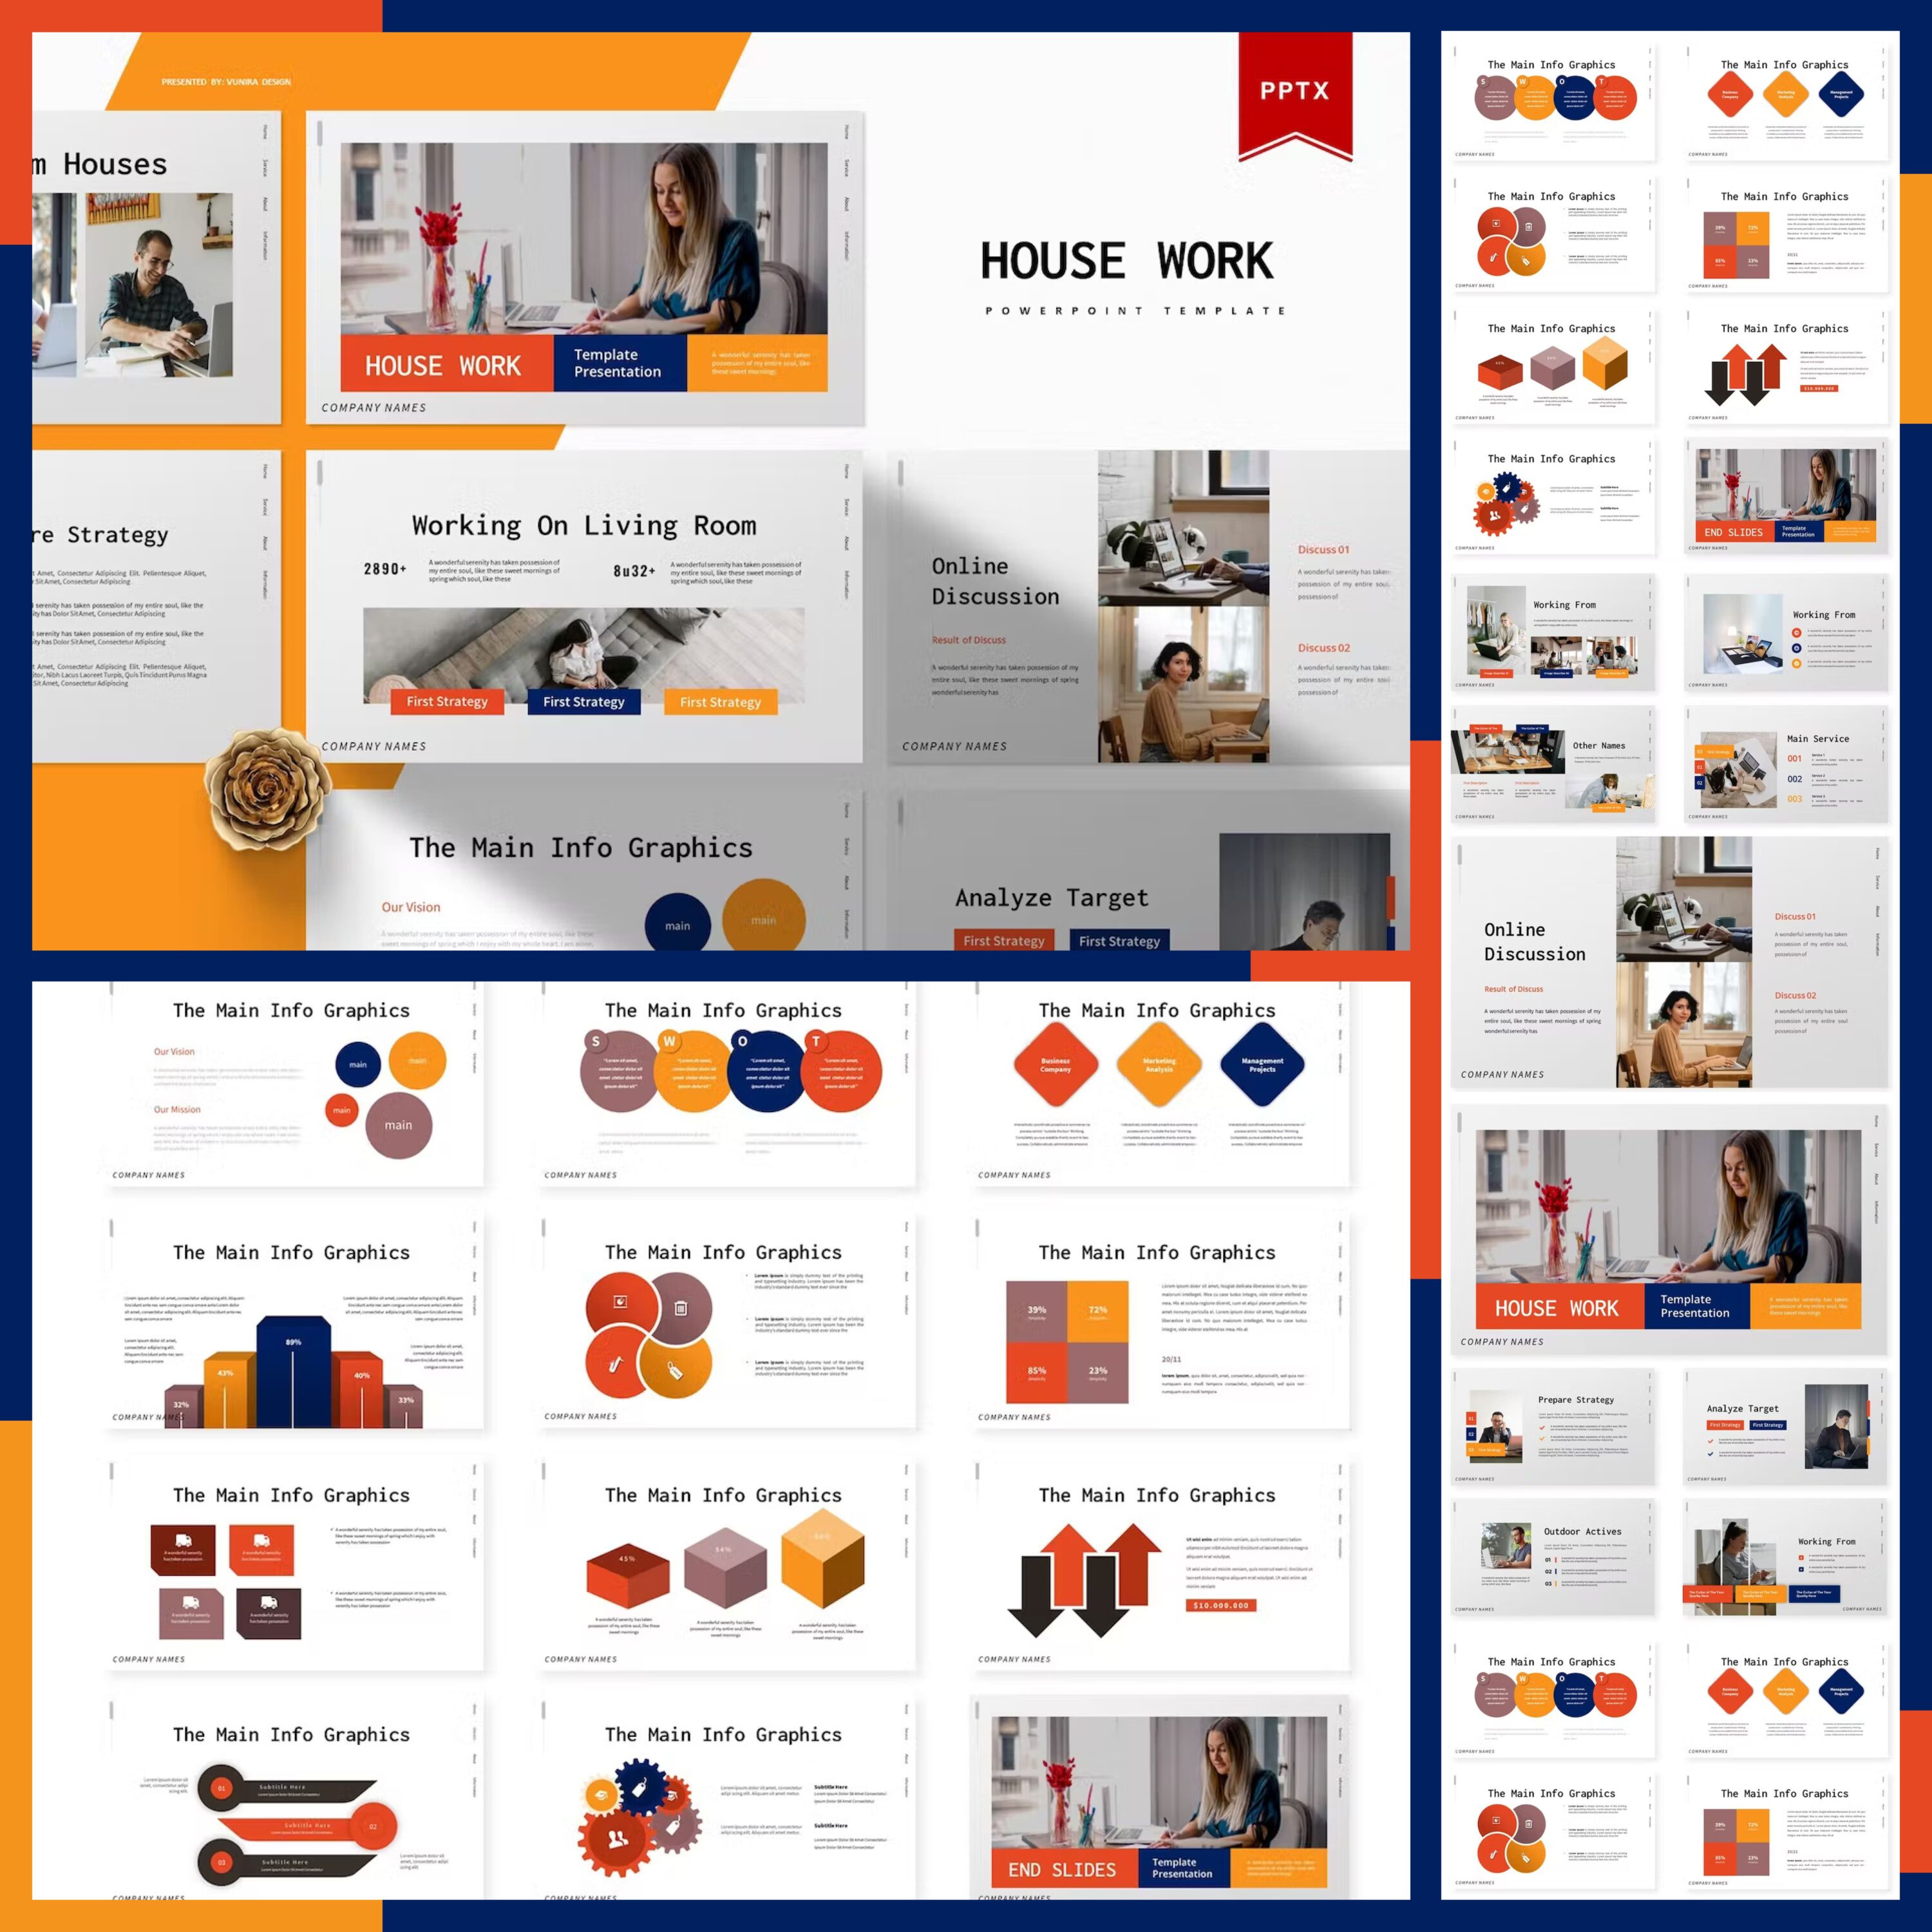 Preview house work powerpoint template.